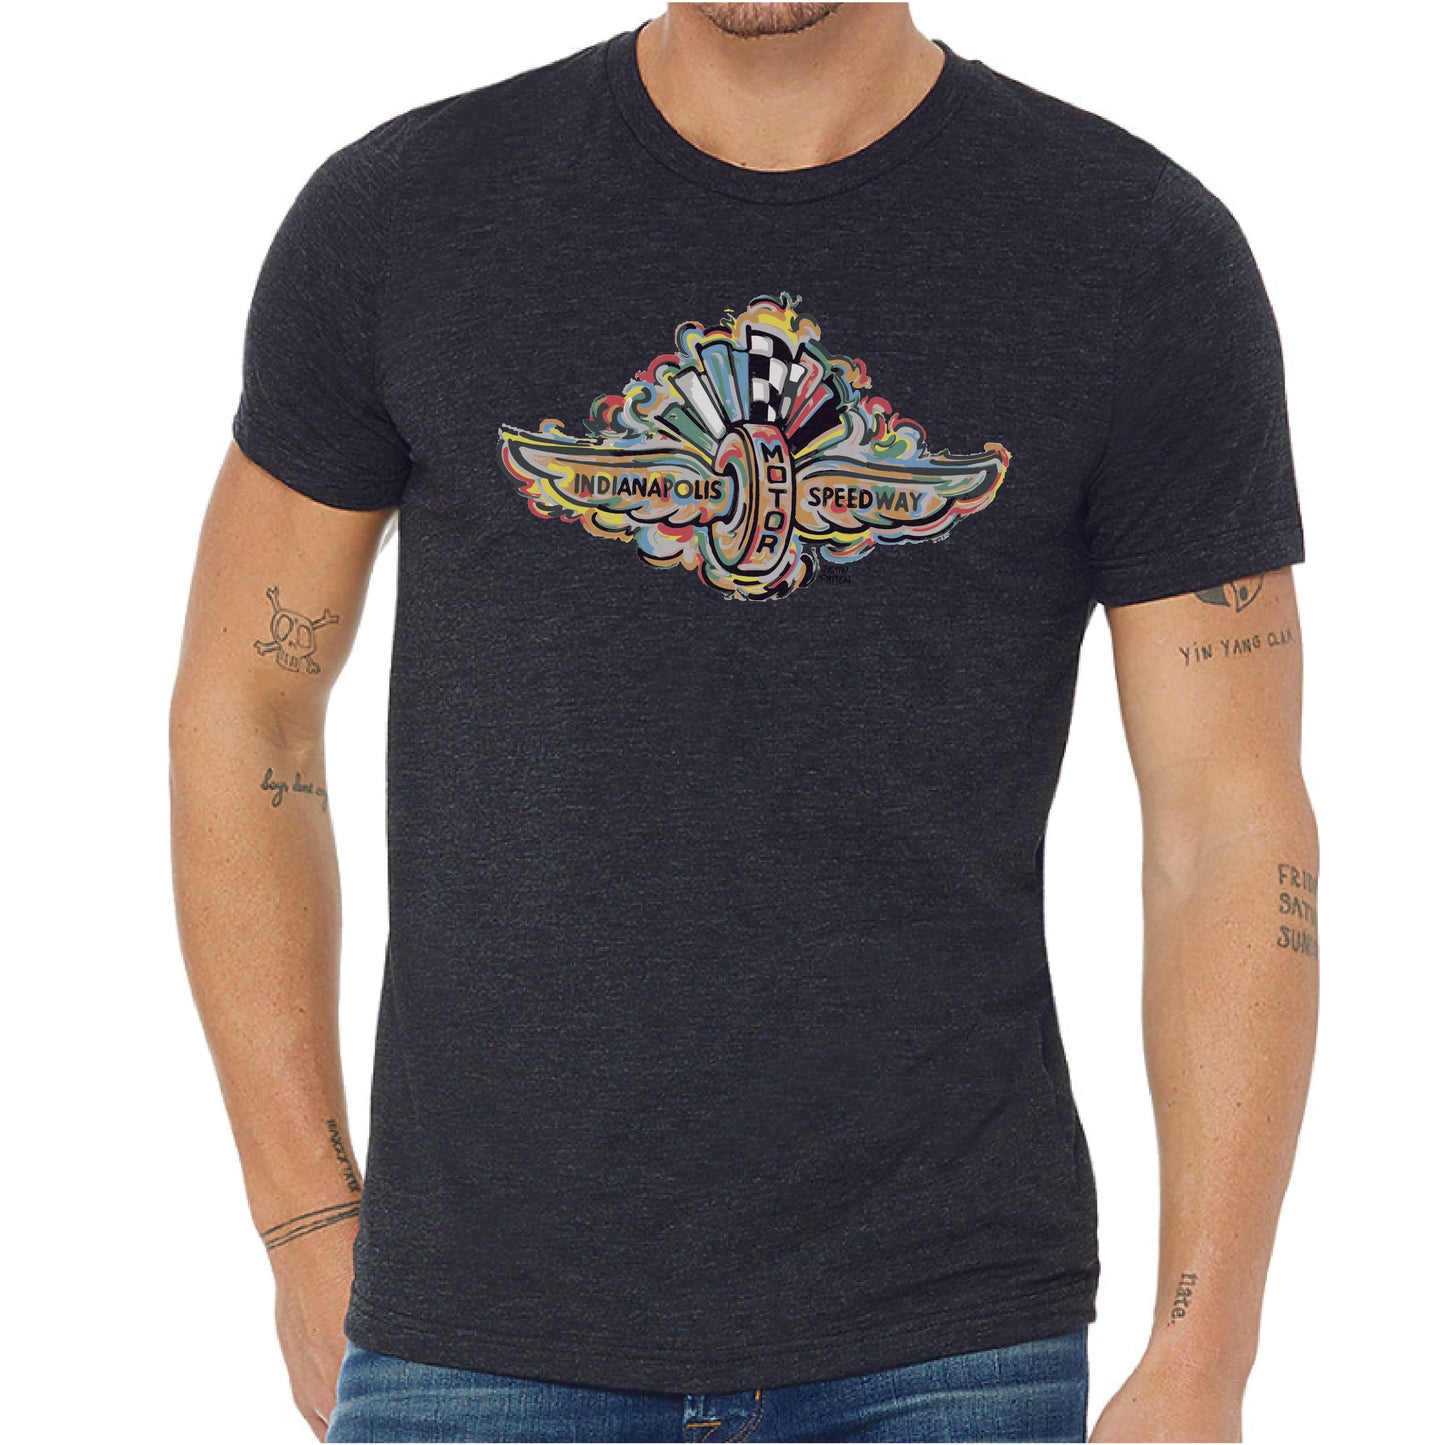 Indianapolis Motor Speedway Wing and Wheel Tee by Justin Patten (7 Colors)